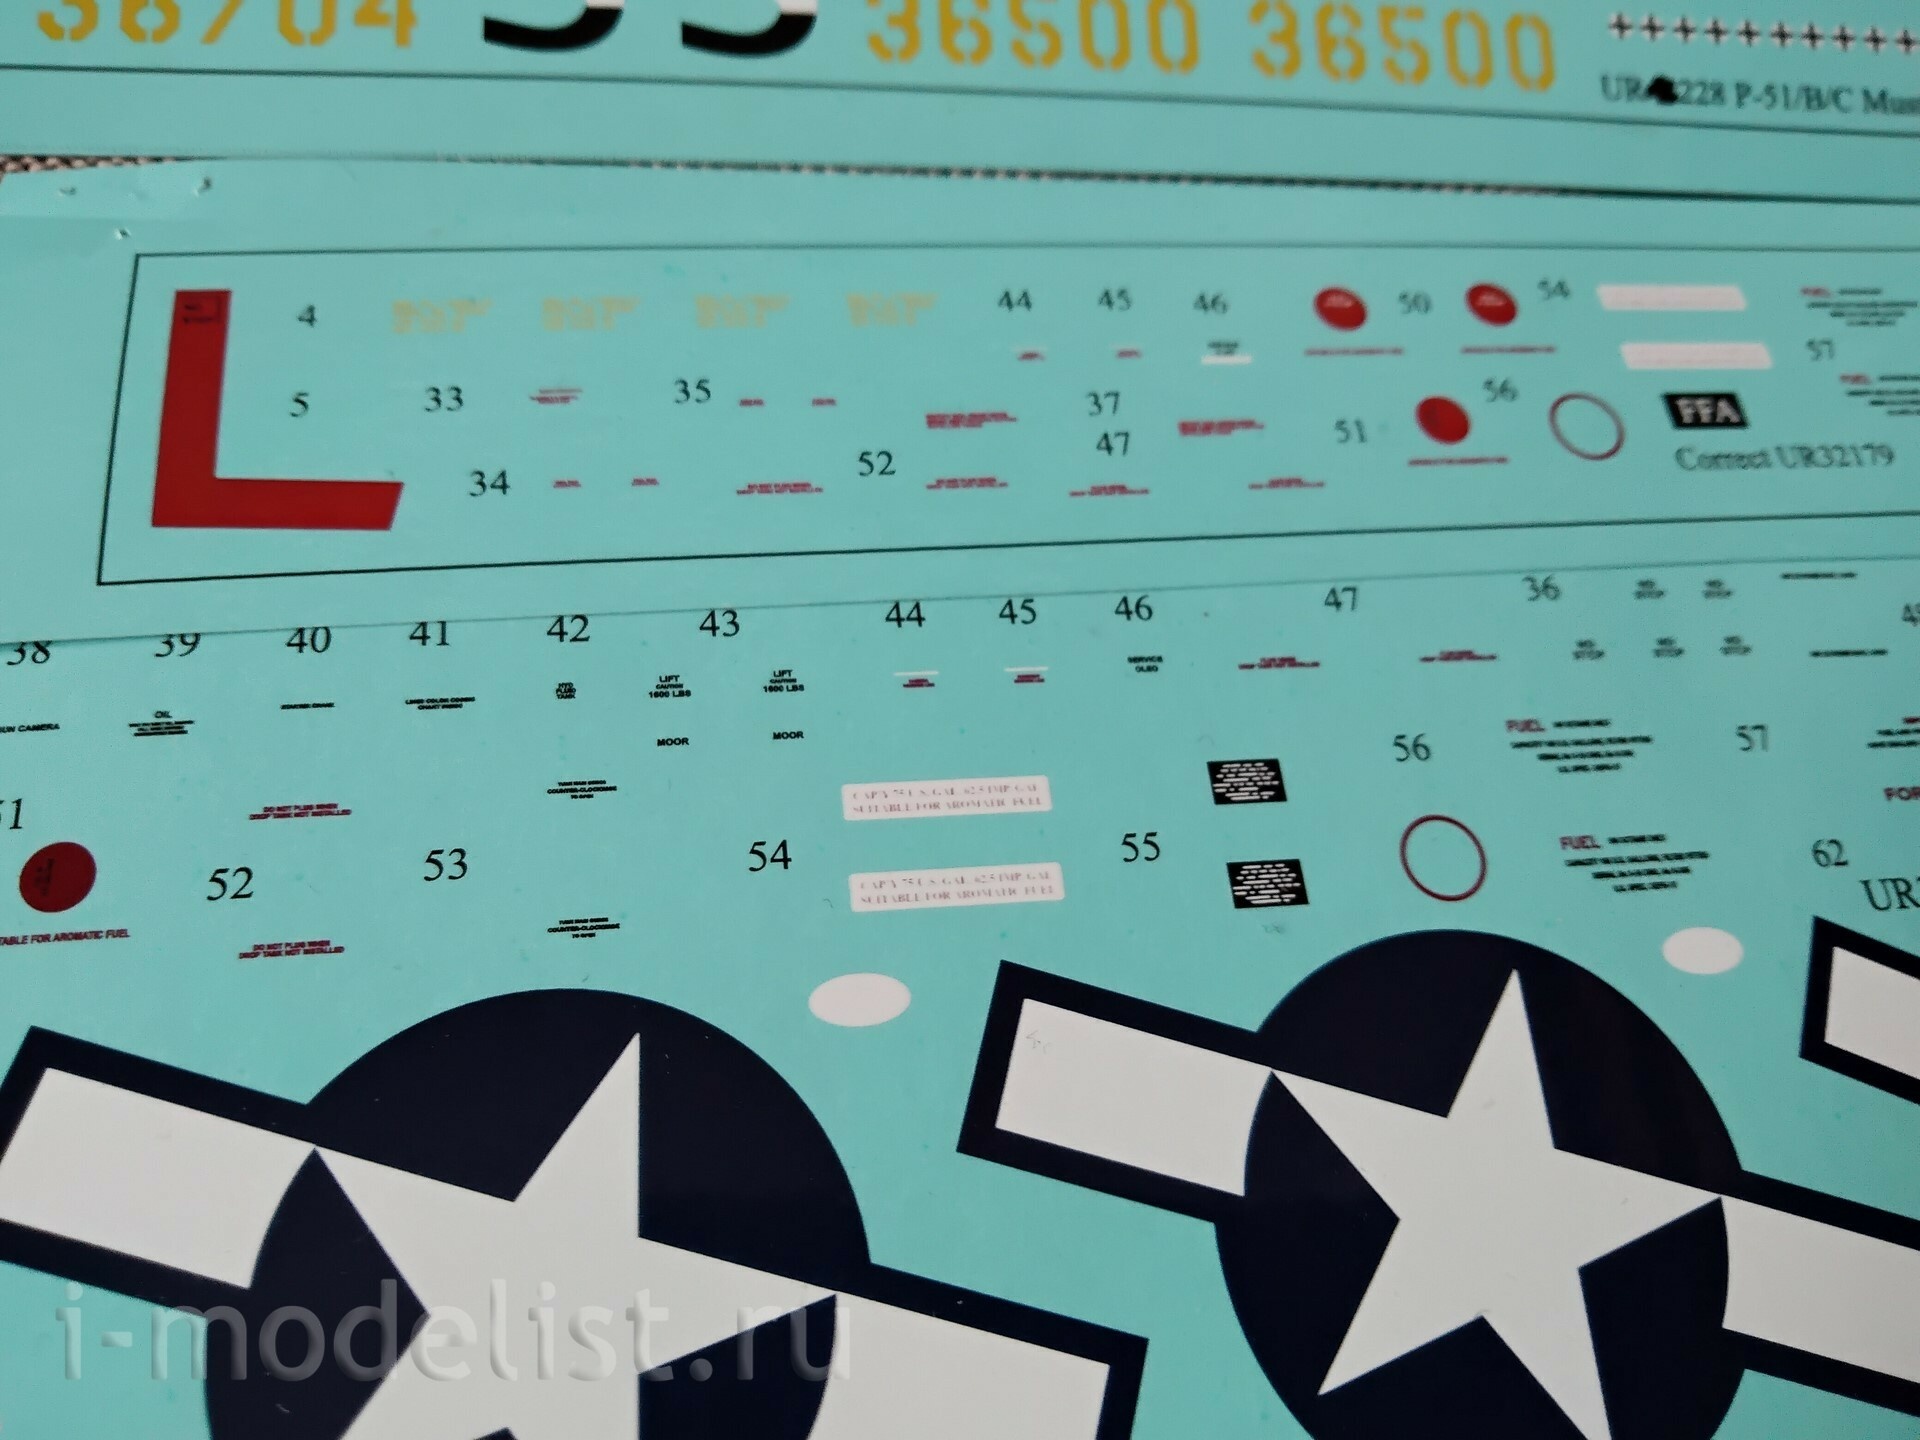 UR48228 Sunrise 1/48 Decal for P-51B/C Mustang Blue Nose Bastards, since. inscriptions, FFA (removable lacquer substrate)